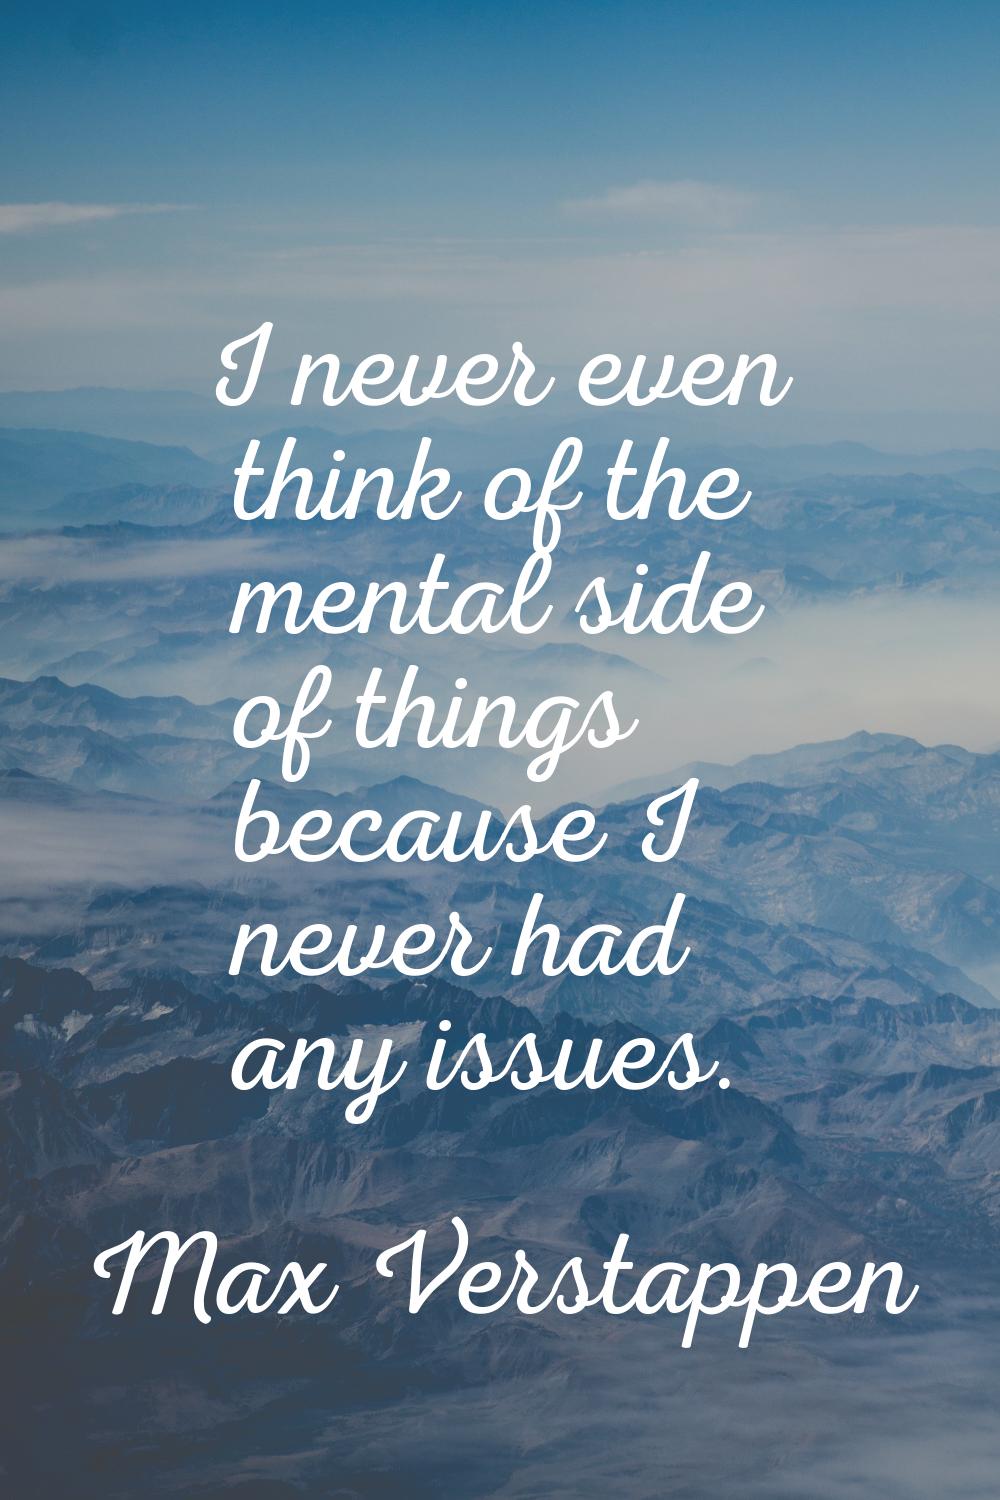 I never even think of the mental side of things because I never had any issues.